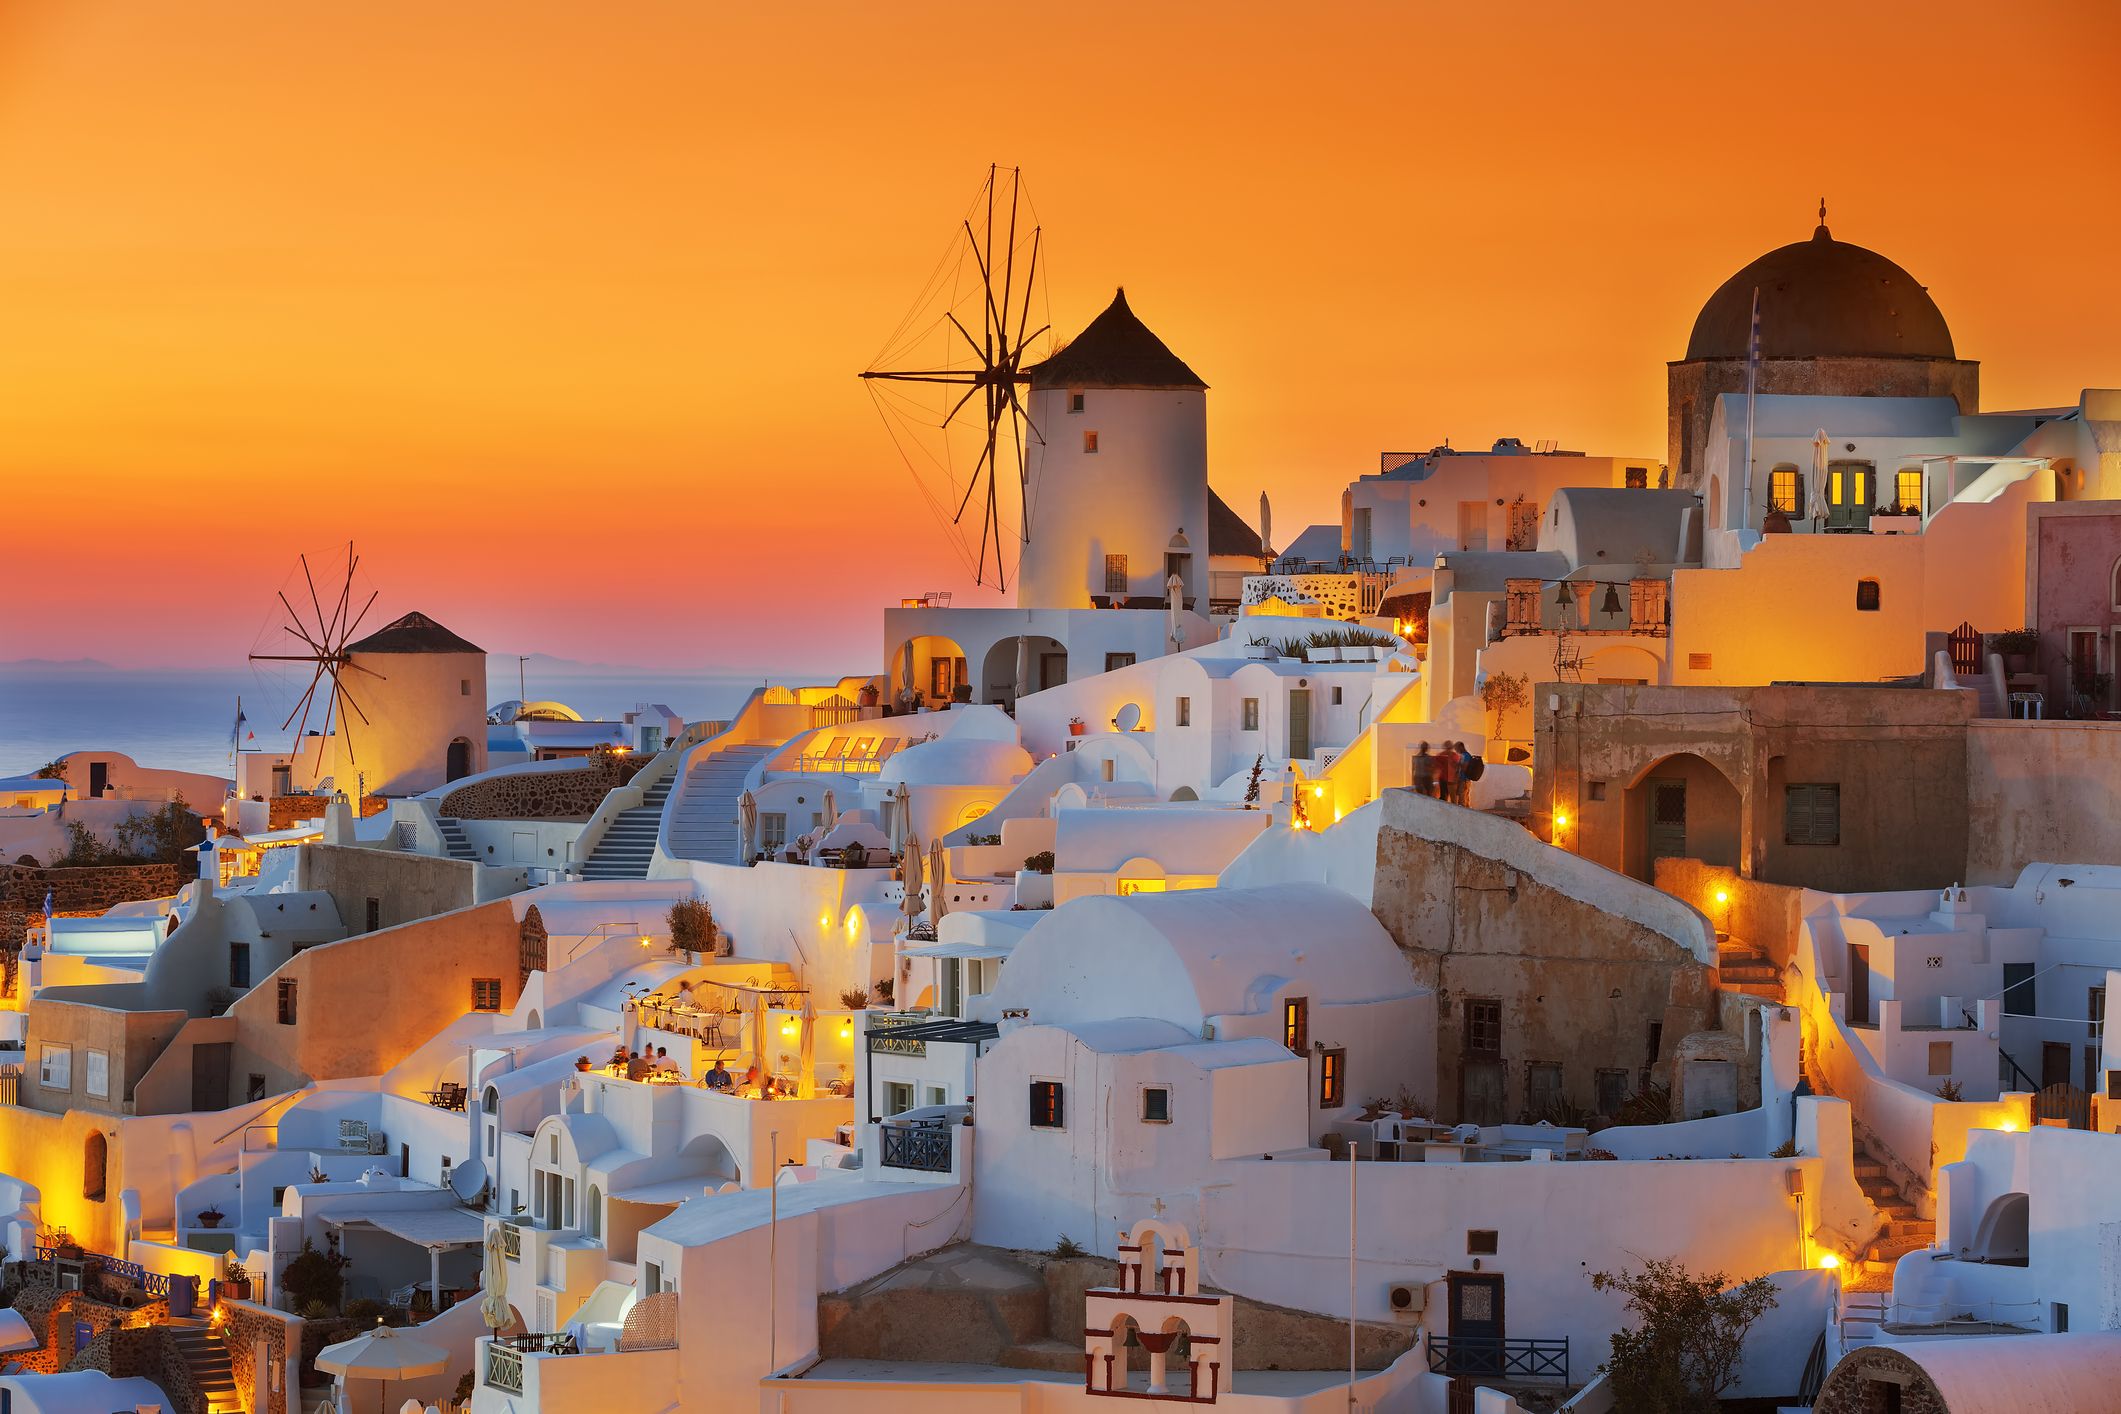 View of Oia at sunset in Santorini